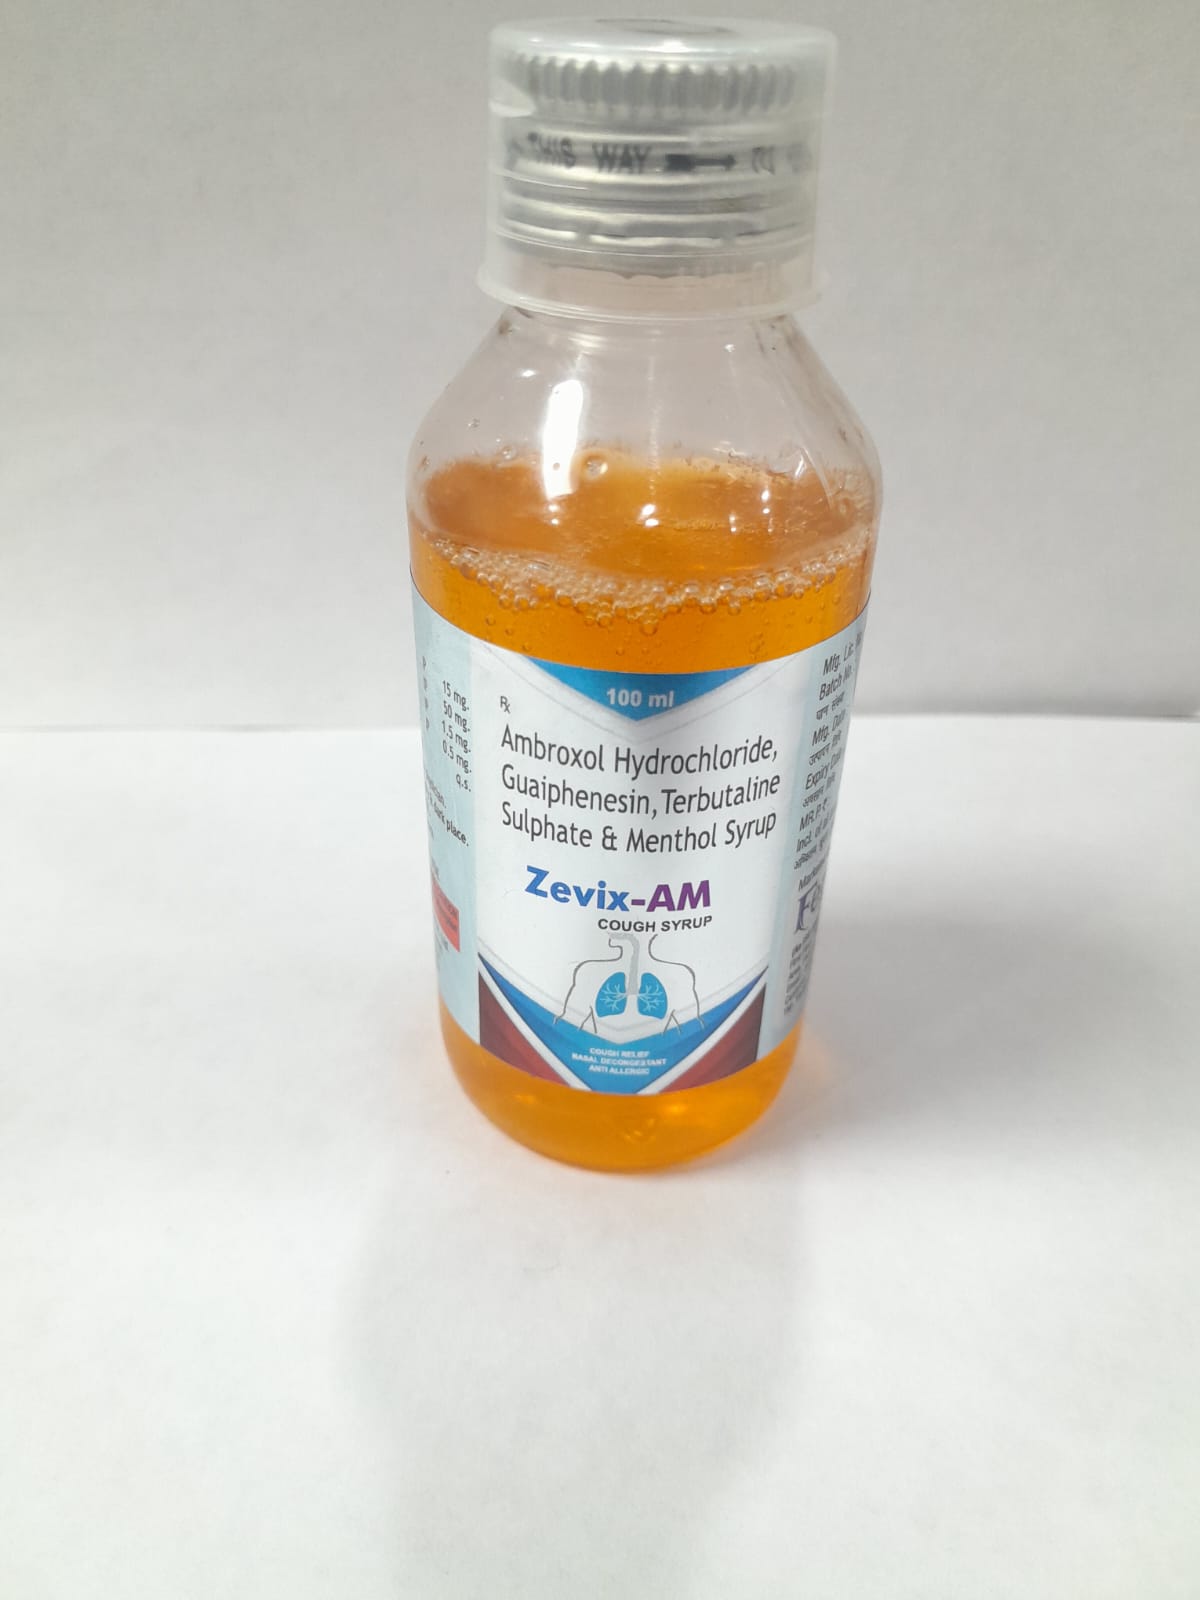 Product Name: ZEVIX AM Syrup, Compositions of ZEVIX AM Syrup are AMBROXOL 15MG, GUAIPHENESIN 50MG, TERBUTALINE 1.5MG, MENTHOL 0.5MG - Feravix Lifesciences